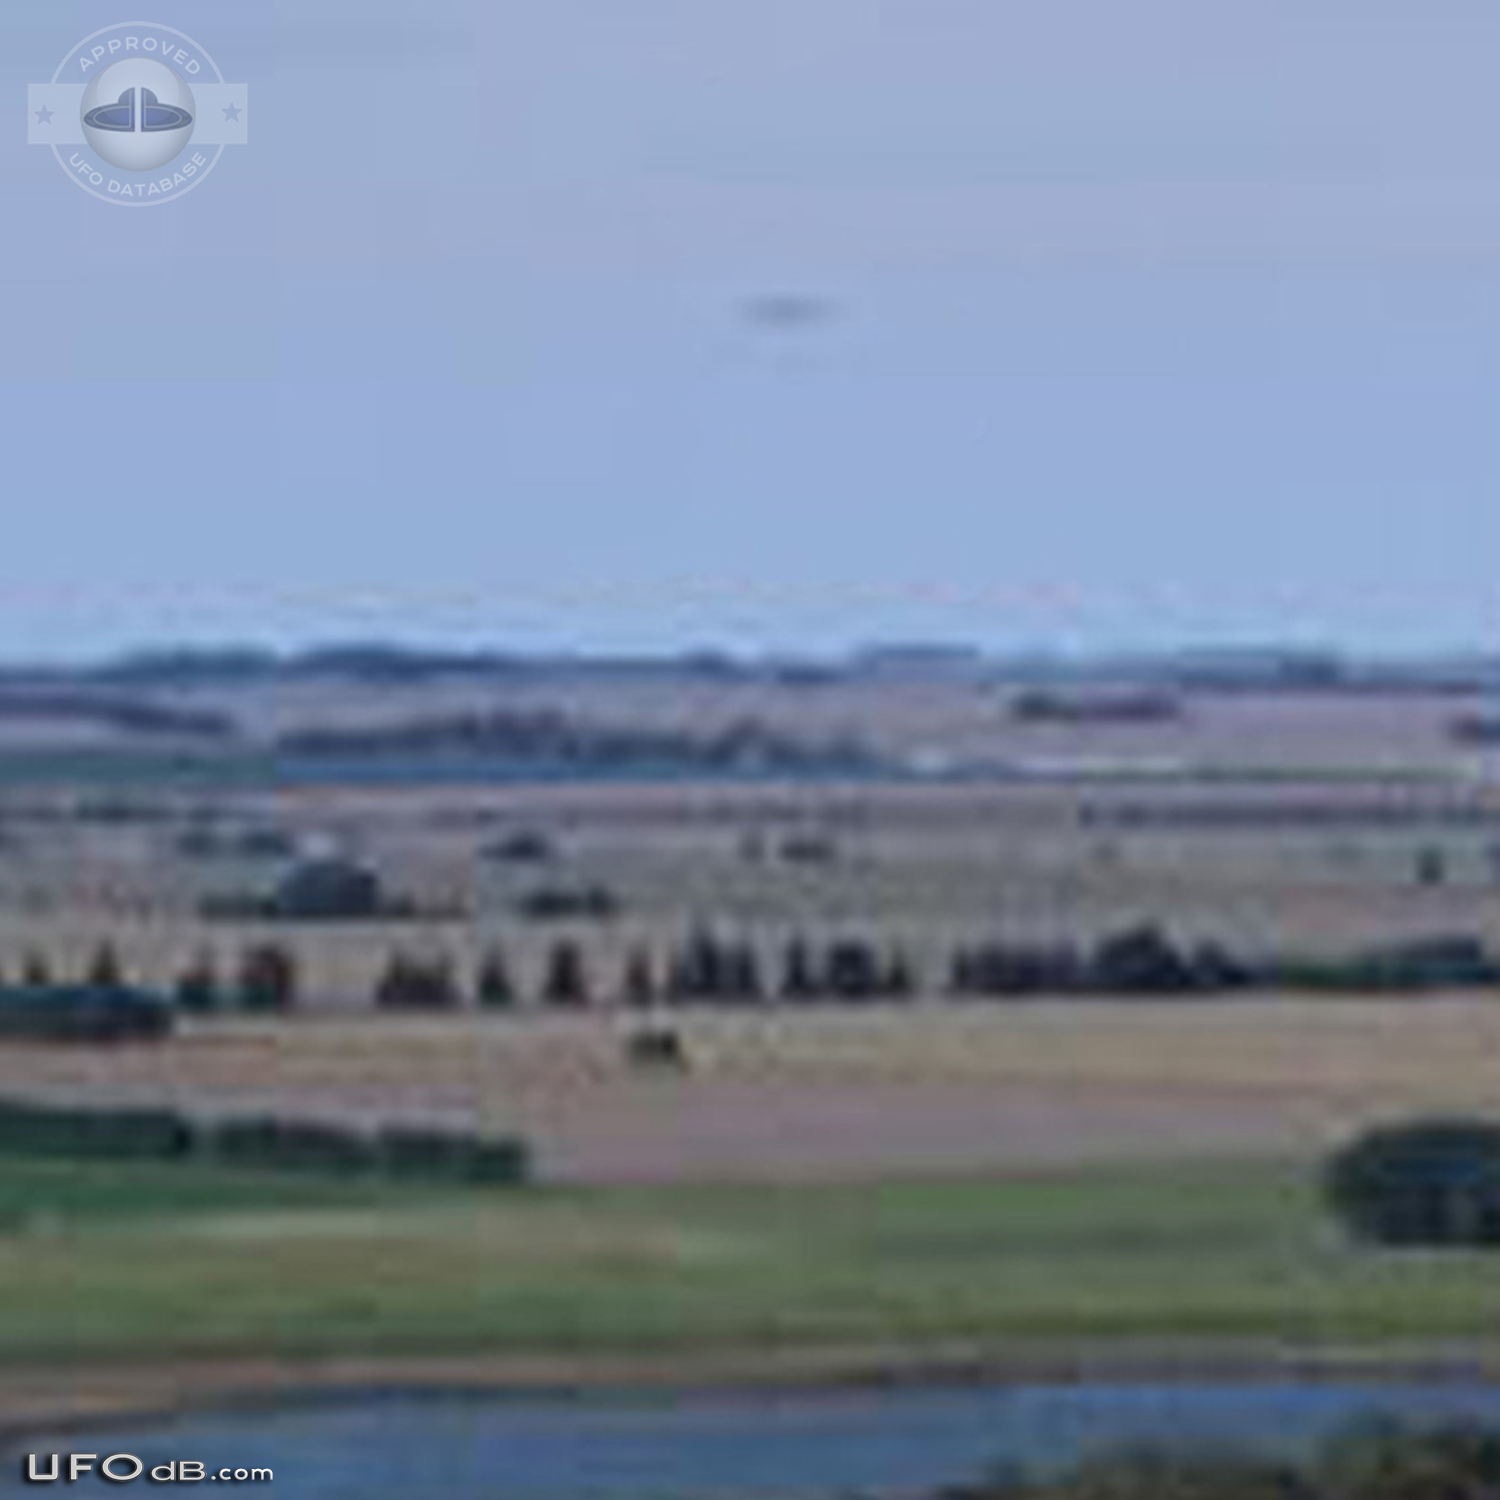 Large 70 meters wide UFO caught on picture - Cordoba, Argentina - 2009 UFO Picture #369-3